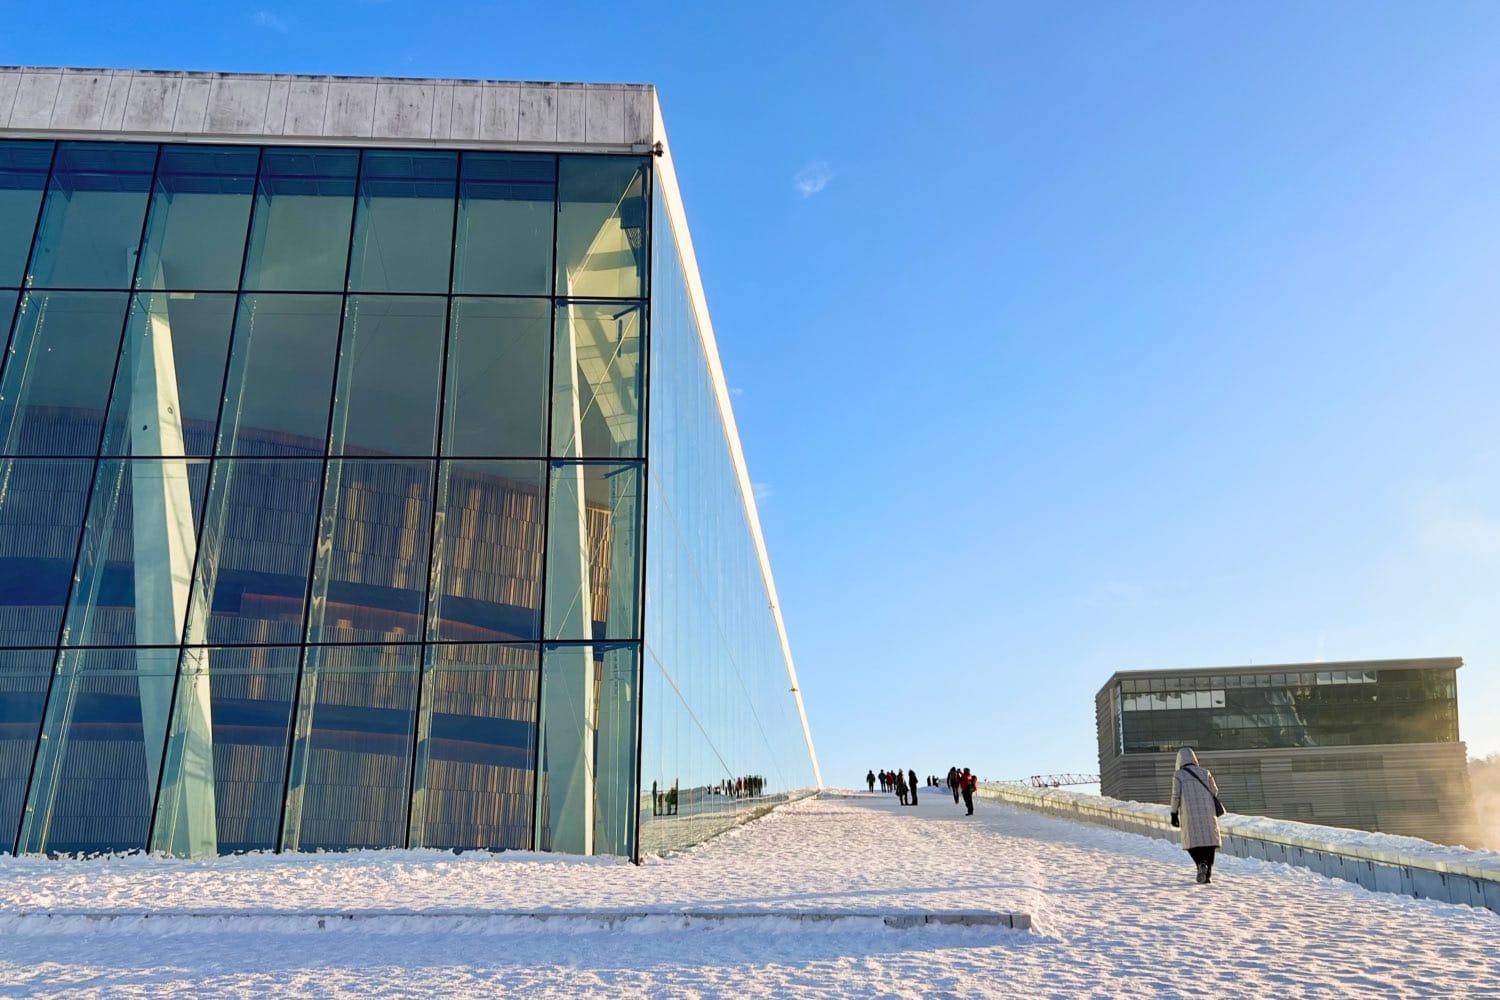 Oslo Recorded Its Lowest Ever Temperature During Our Visit